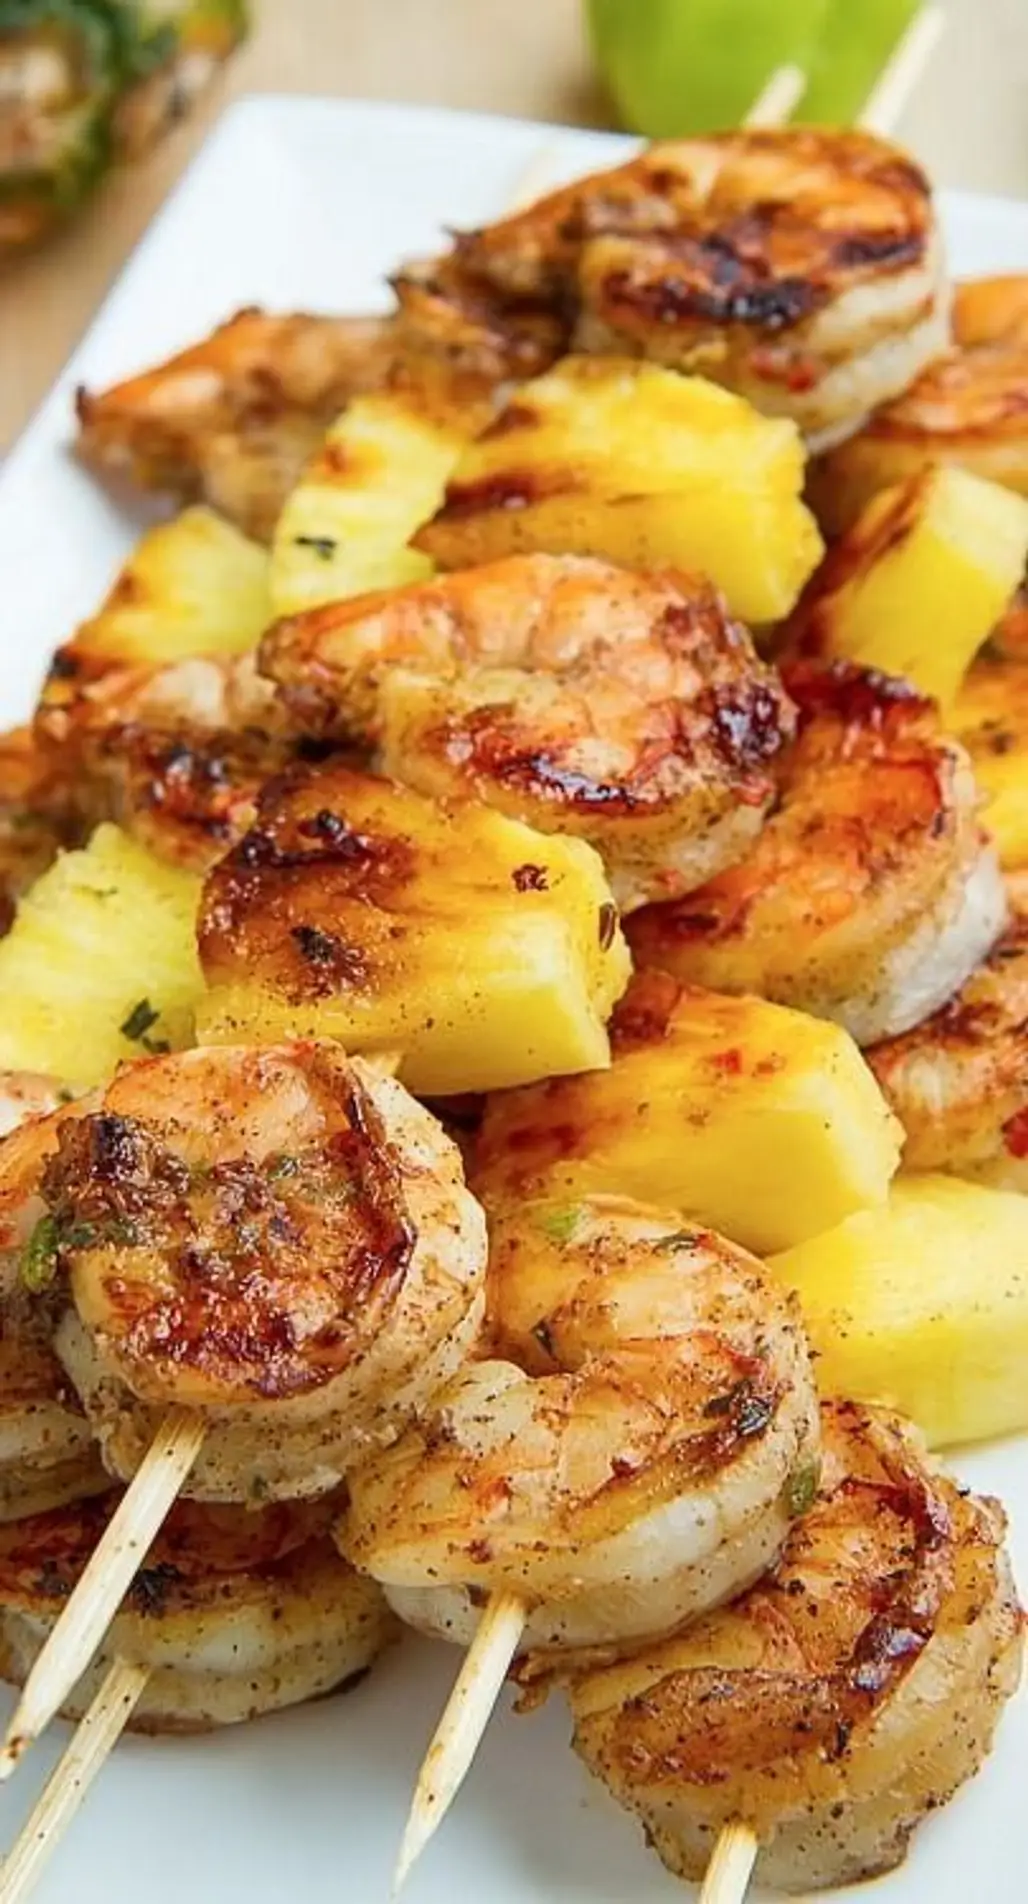 Grilled Shrimp and Pineapple Skewers